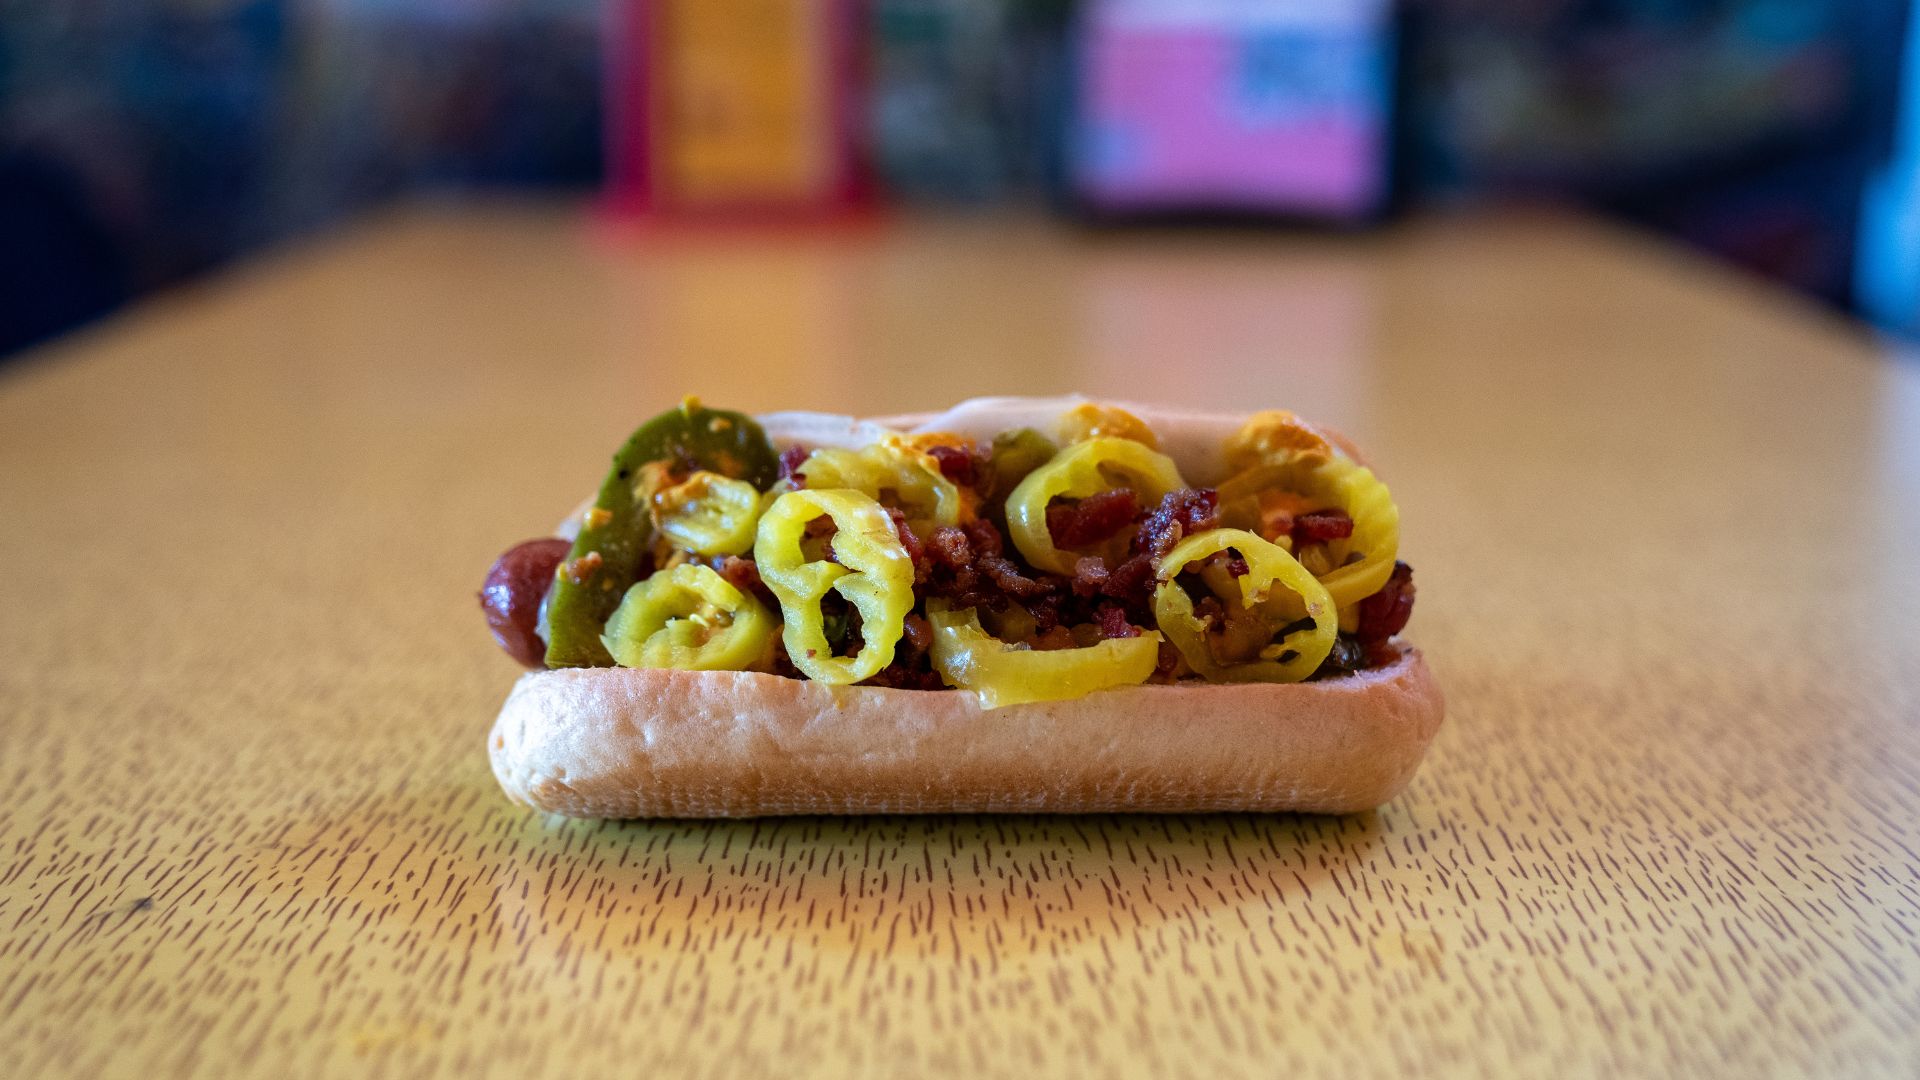 The St. Louis Dog features a fresh bun lined with Provolone and an all-beef hot dog topped with grilled onions, grilled bell peppers, banana peppers, bacon and smoked pepper mustard.